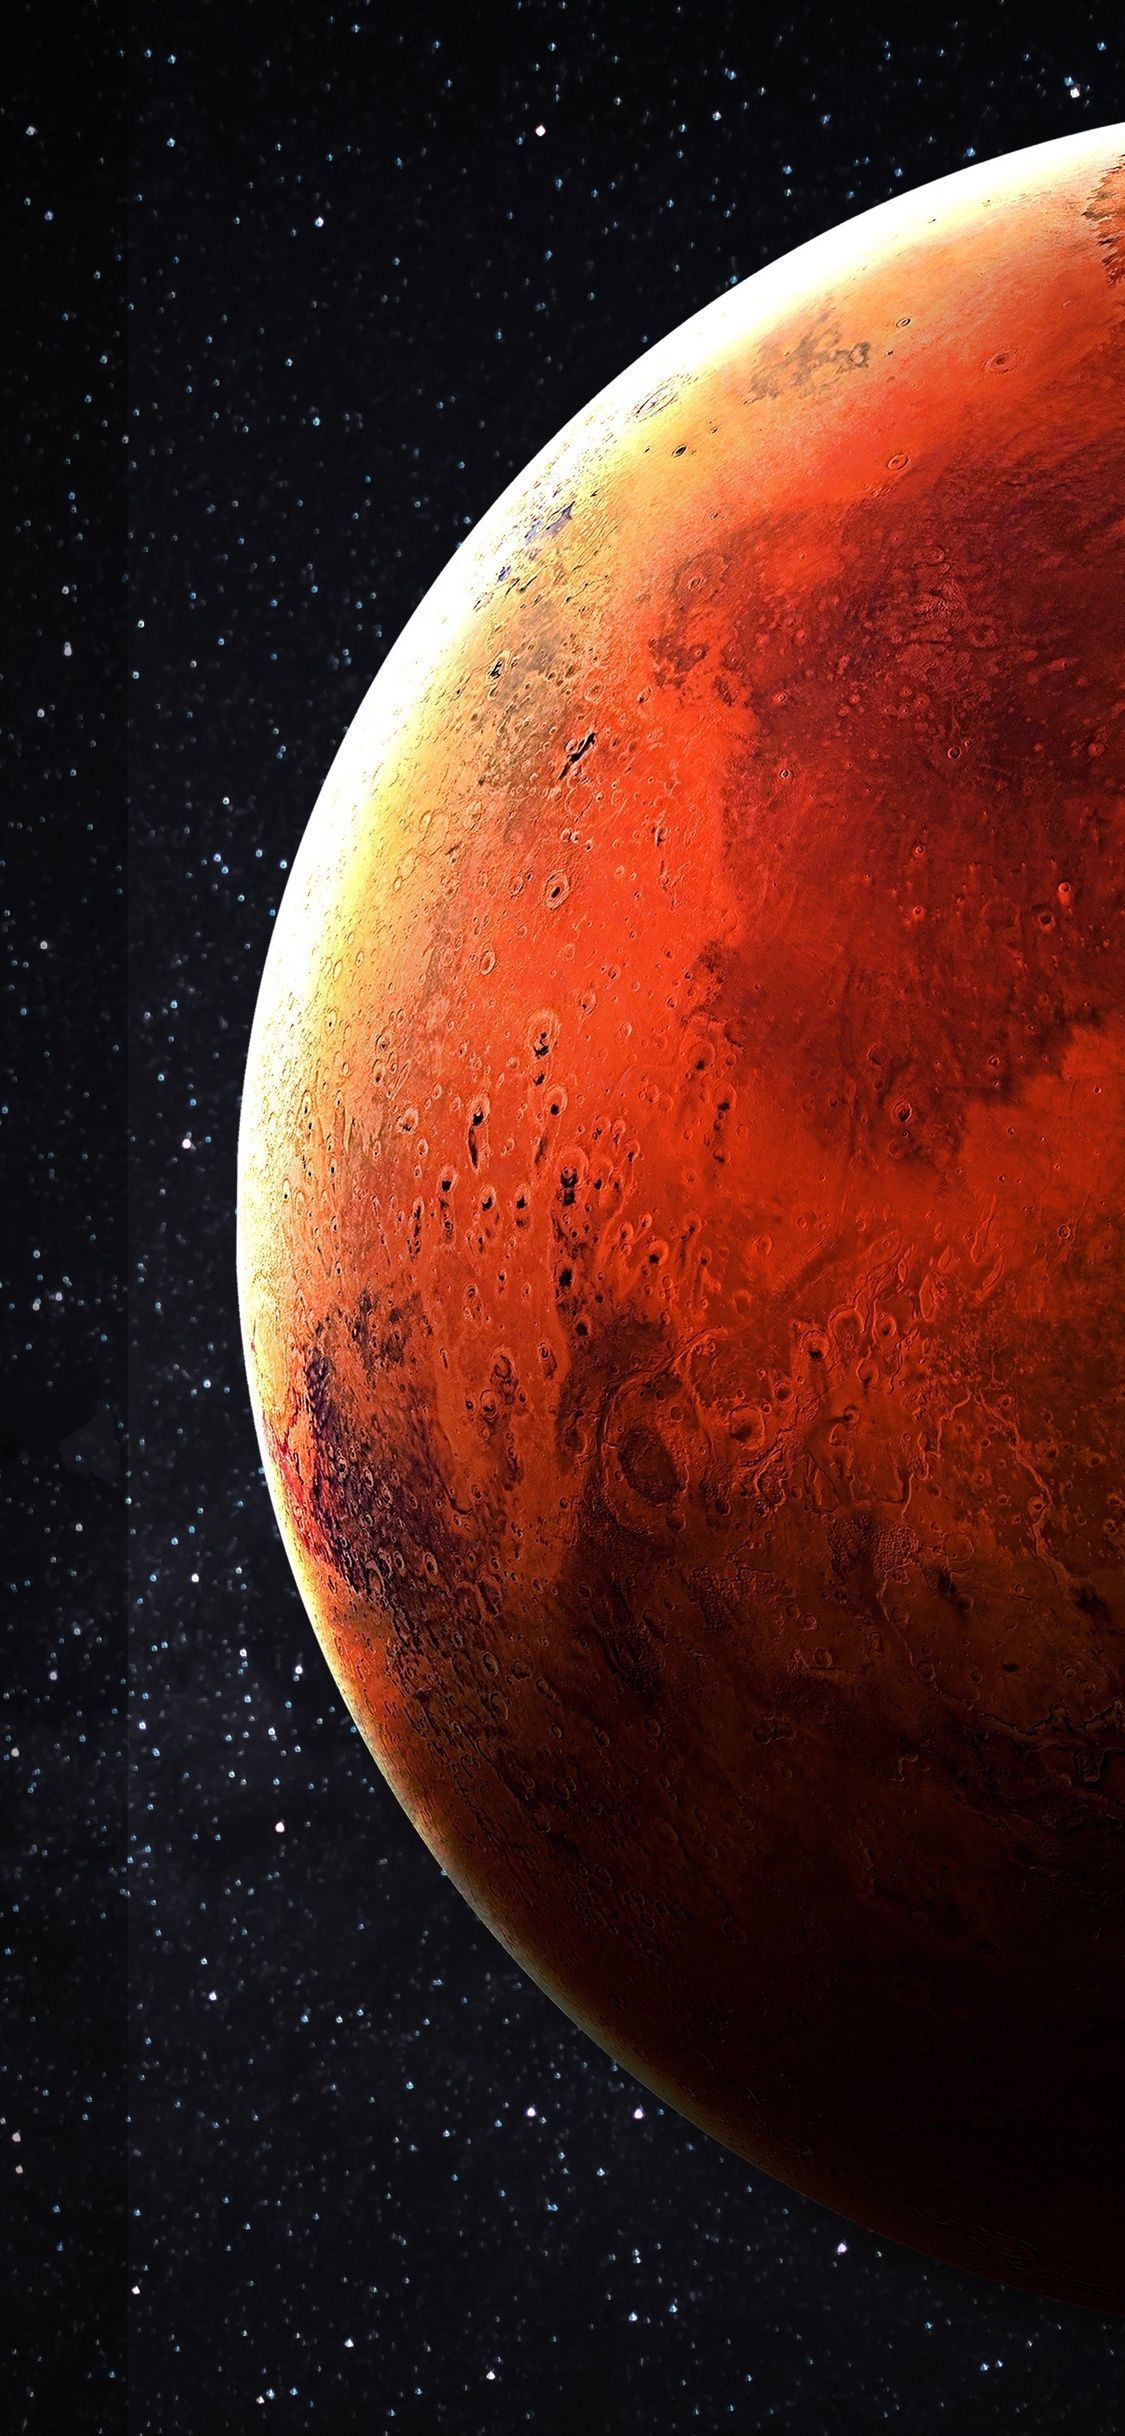 Mars planet in the space wallpaper 12429 - Mars